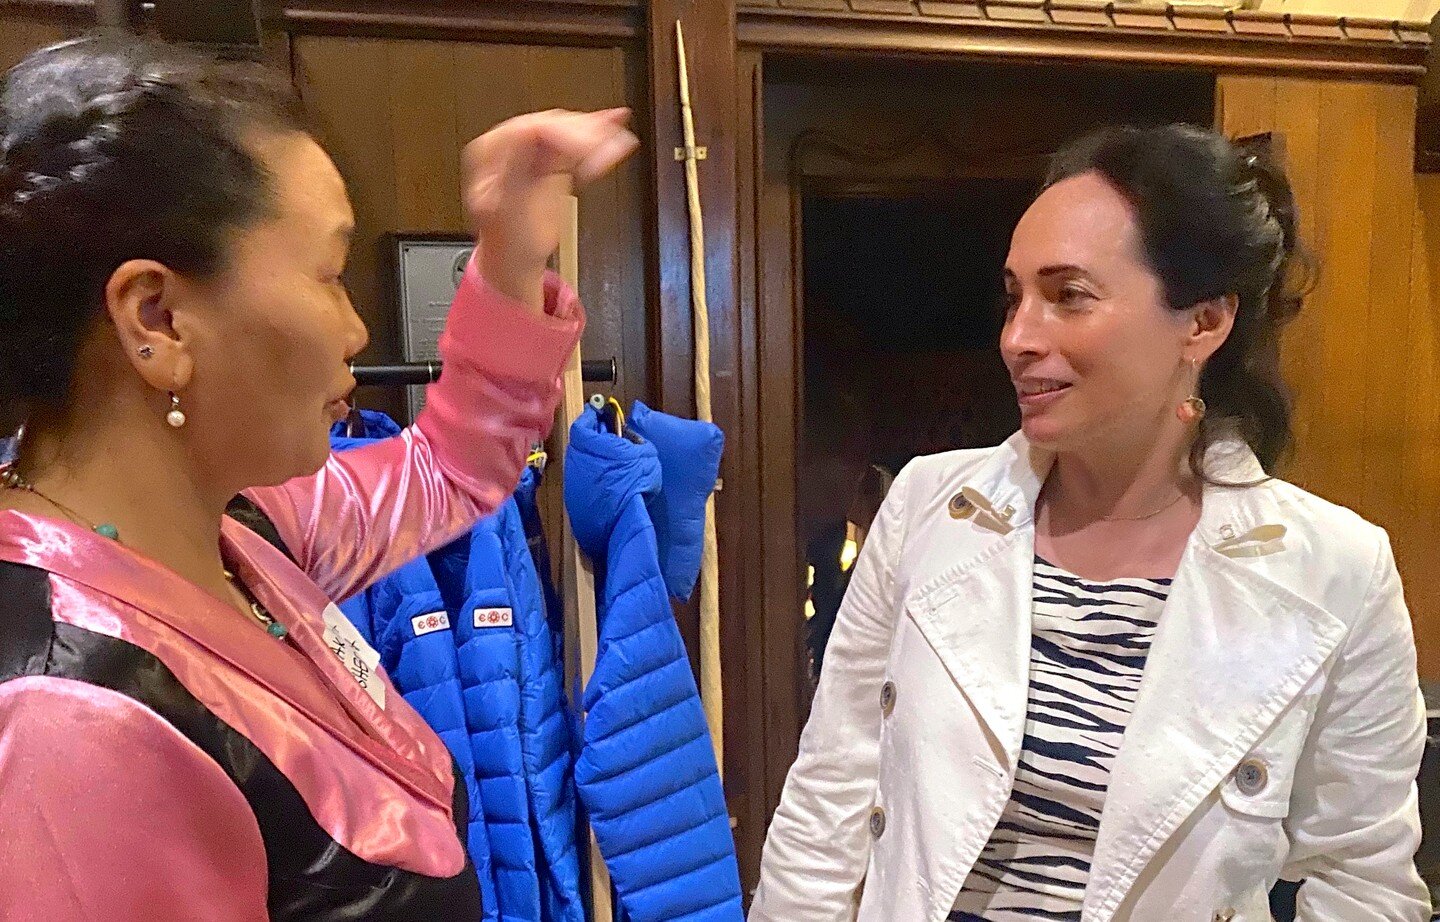 With @lhakpa_sherpa10 at @the_explorers_club last night -- first female to summit Everest ten times -- talking about Tengboche monastery (pic #3) en route to Everest base camp, where mountaineers stop to pray before attempting ascent and where the ba